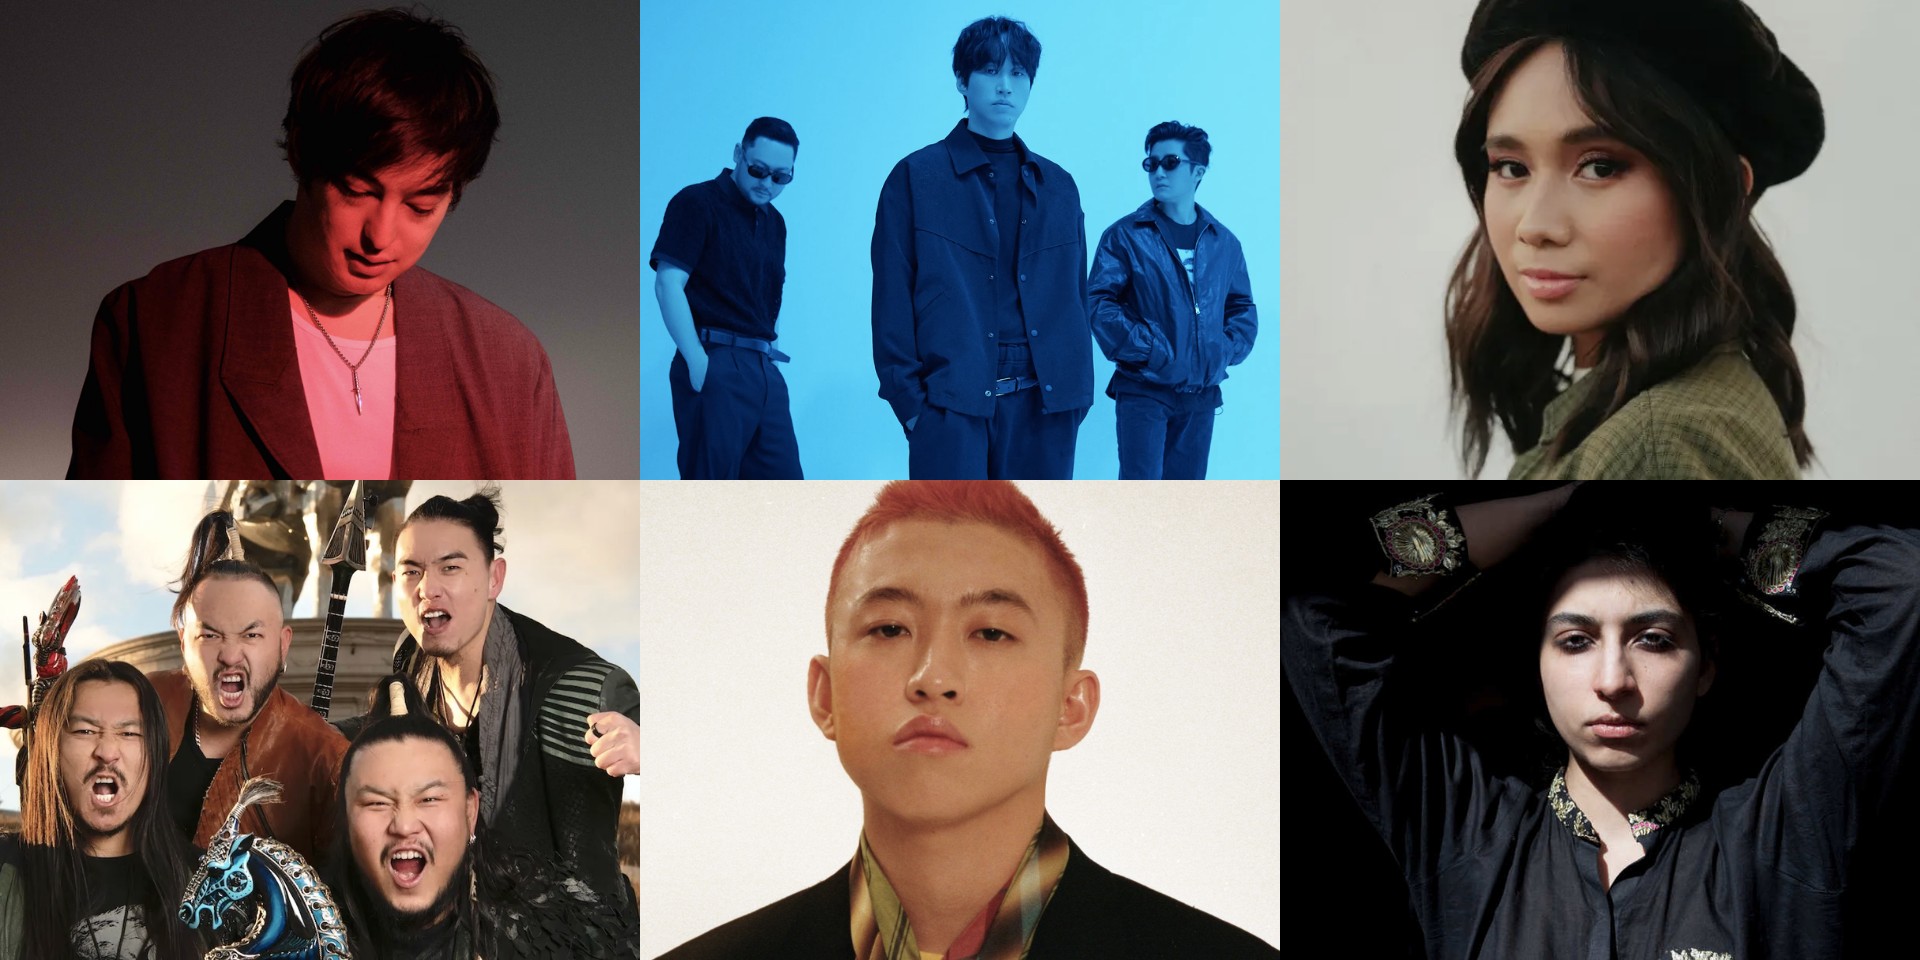 Asian acts to check out at Coachella 2022: EPIK HIGH, Arooj Aftab, NIKI, The Hu, and more